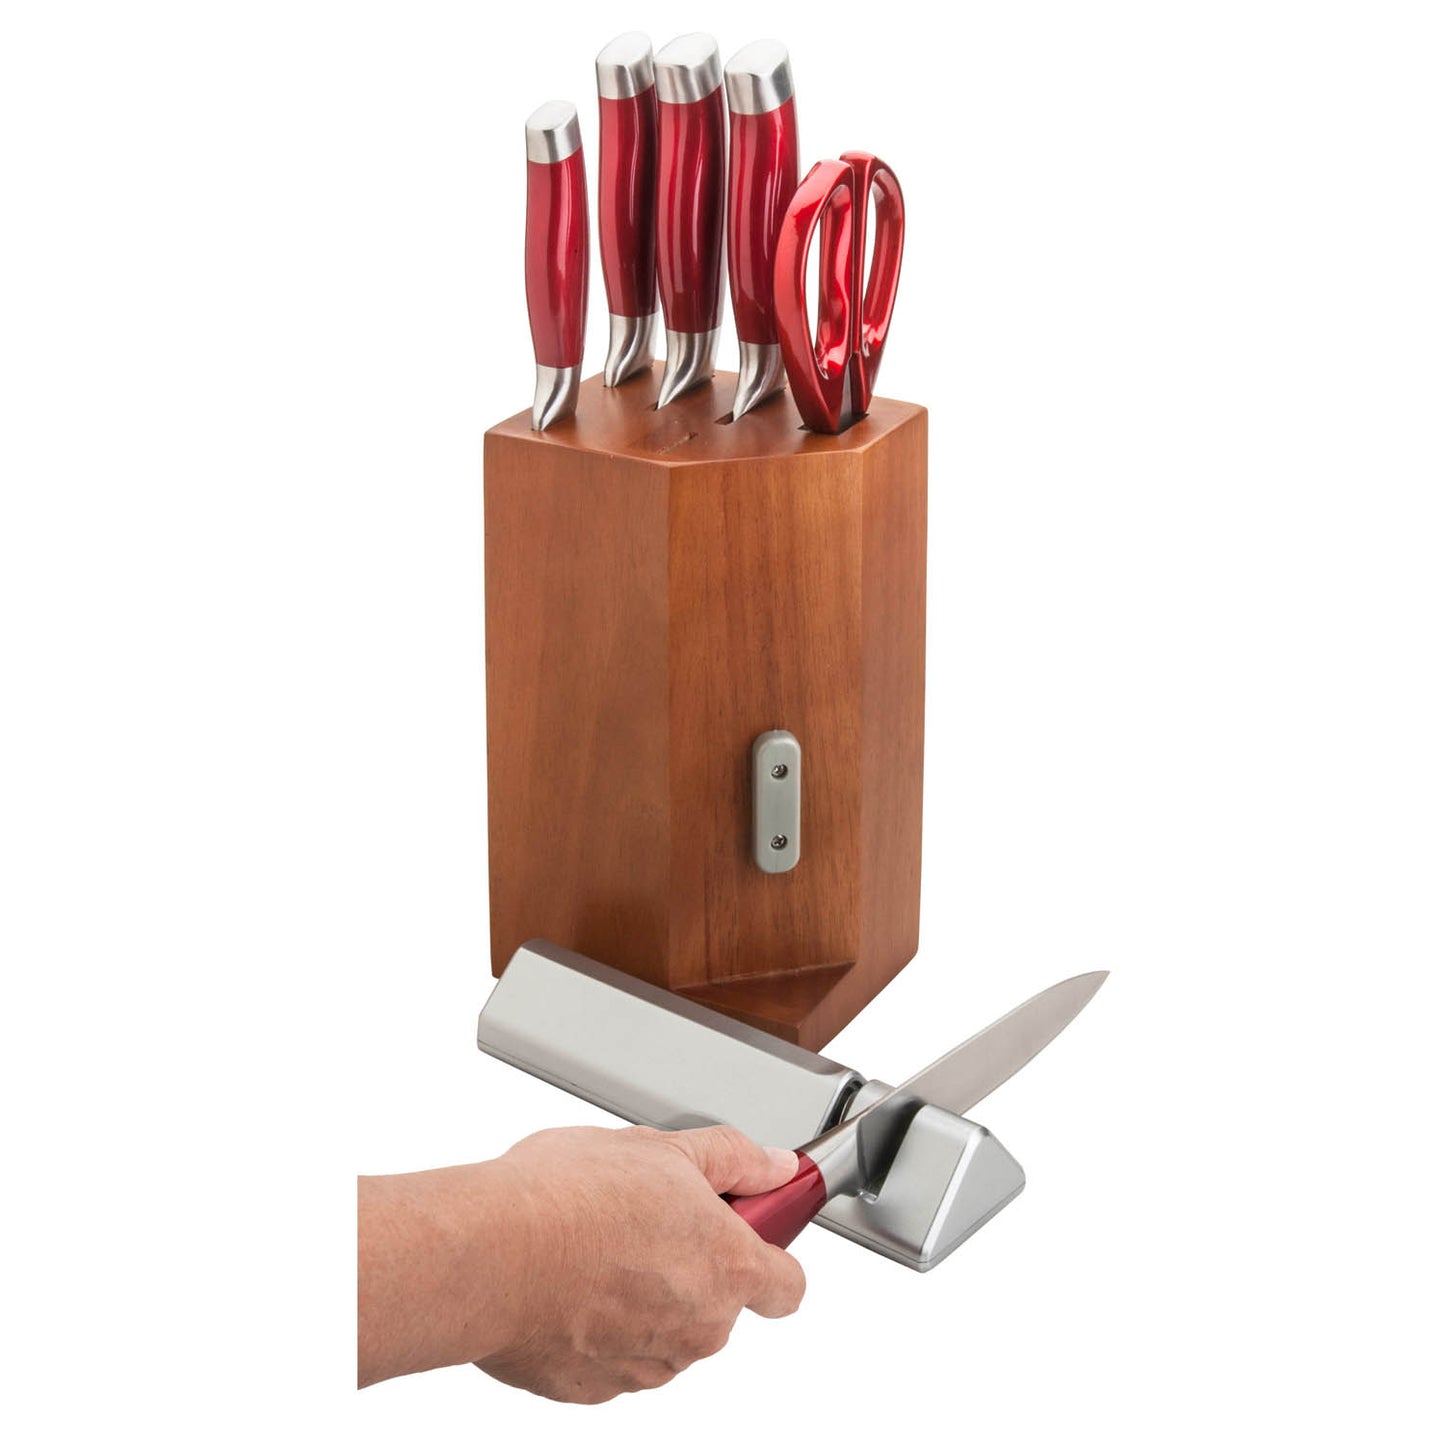 7 piece Stainless Steel Cutlery Set with detachable knife sharpener - Red